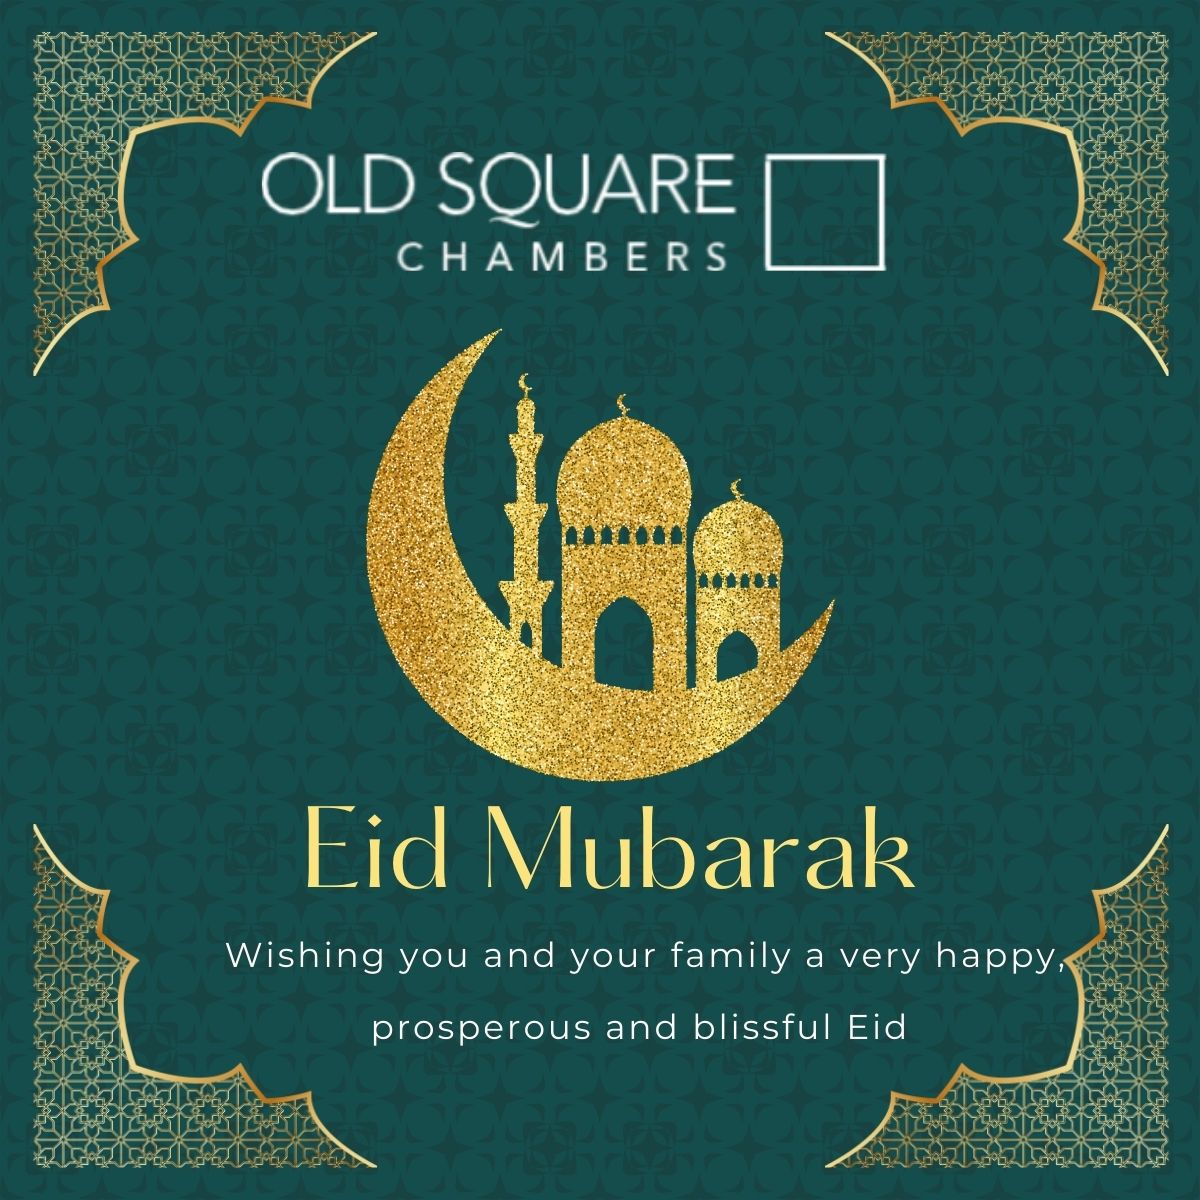 Eid Mubarak to all those celebrating from all at @OldSqChambers 🌙✨